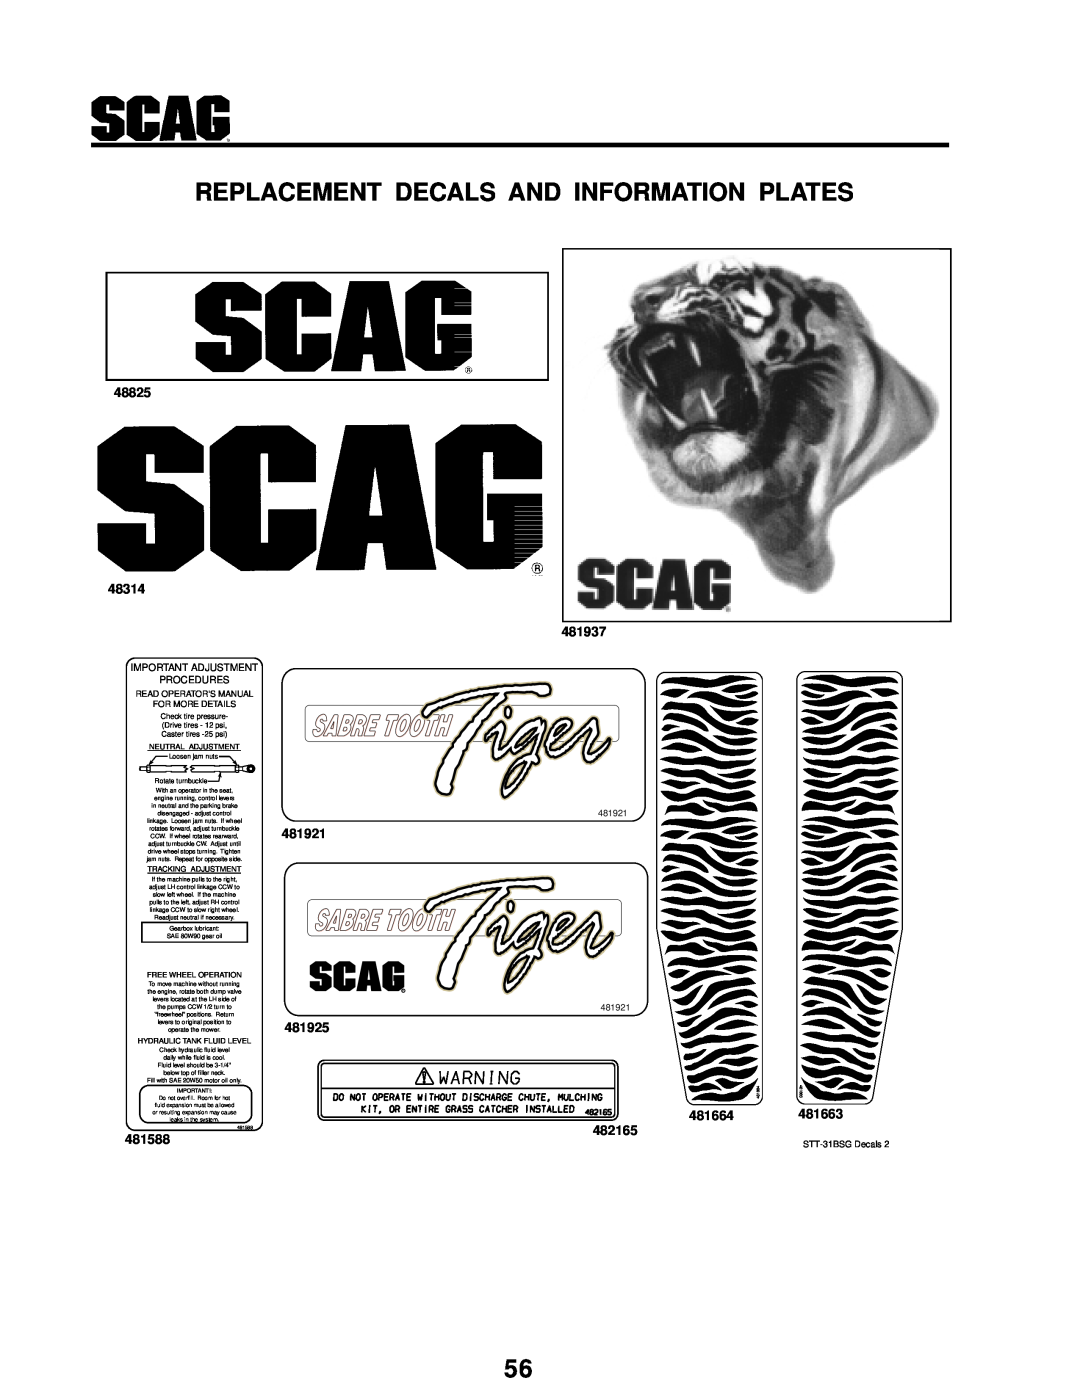 Scag Power Equipment STT-31BSG Replacement Decals And Information Plates, 48825 48314, 481588, 481937, 481921, 481925 